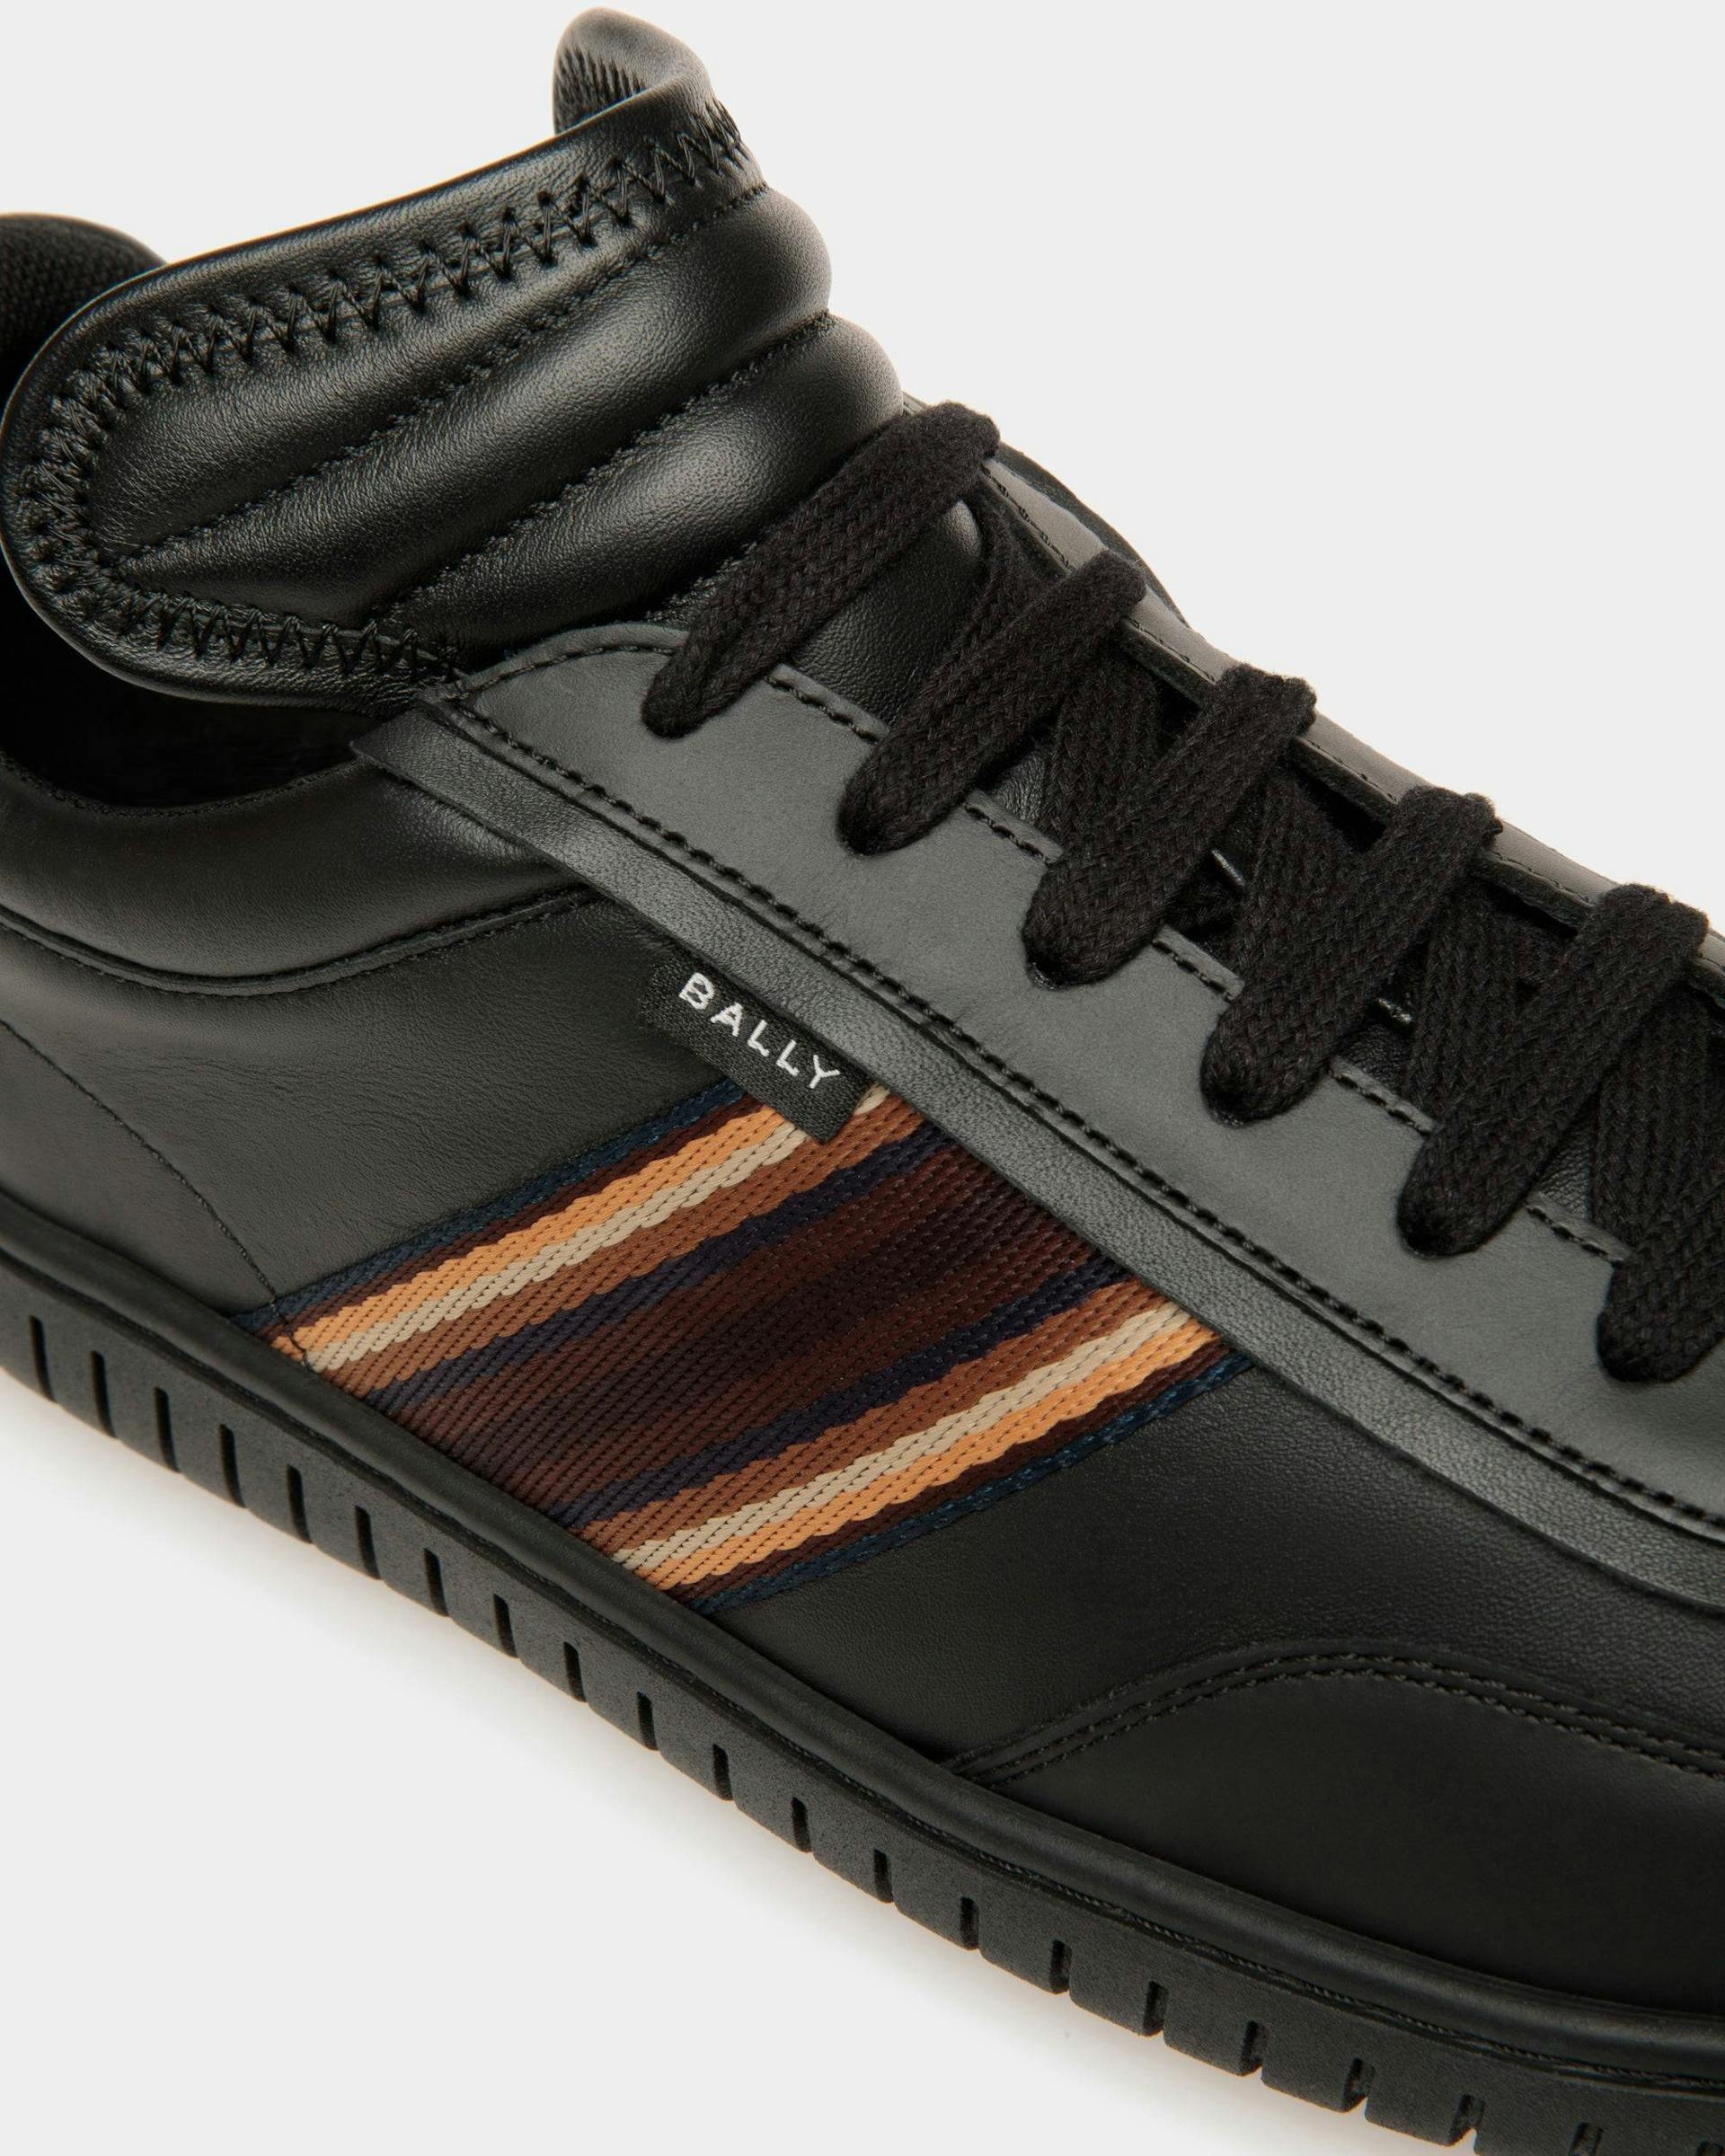 Player Sneakers In Black Leather - Men's - Bally - 05